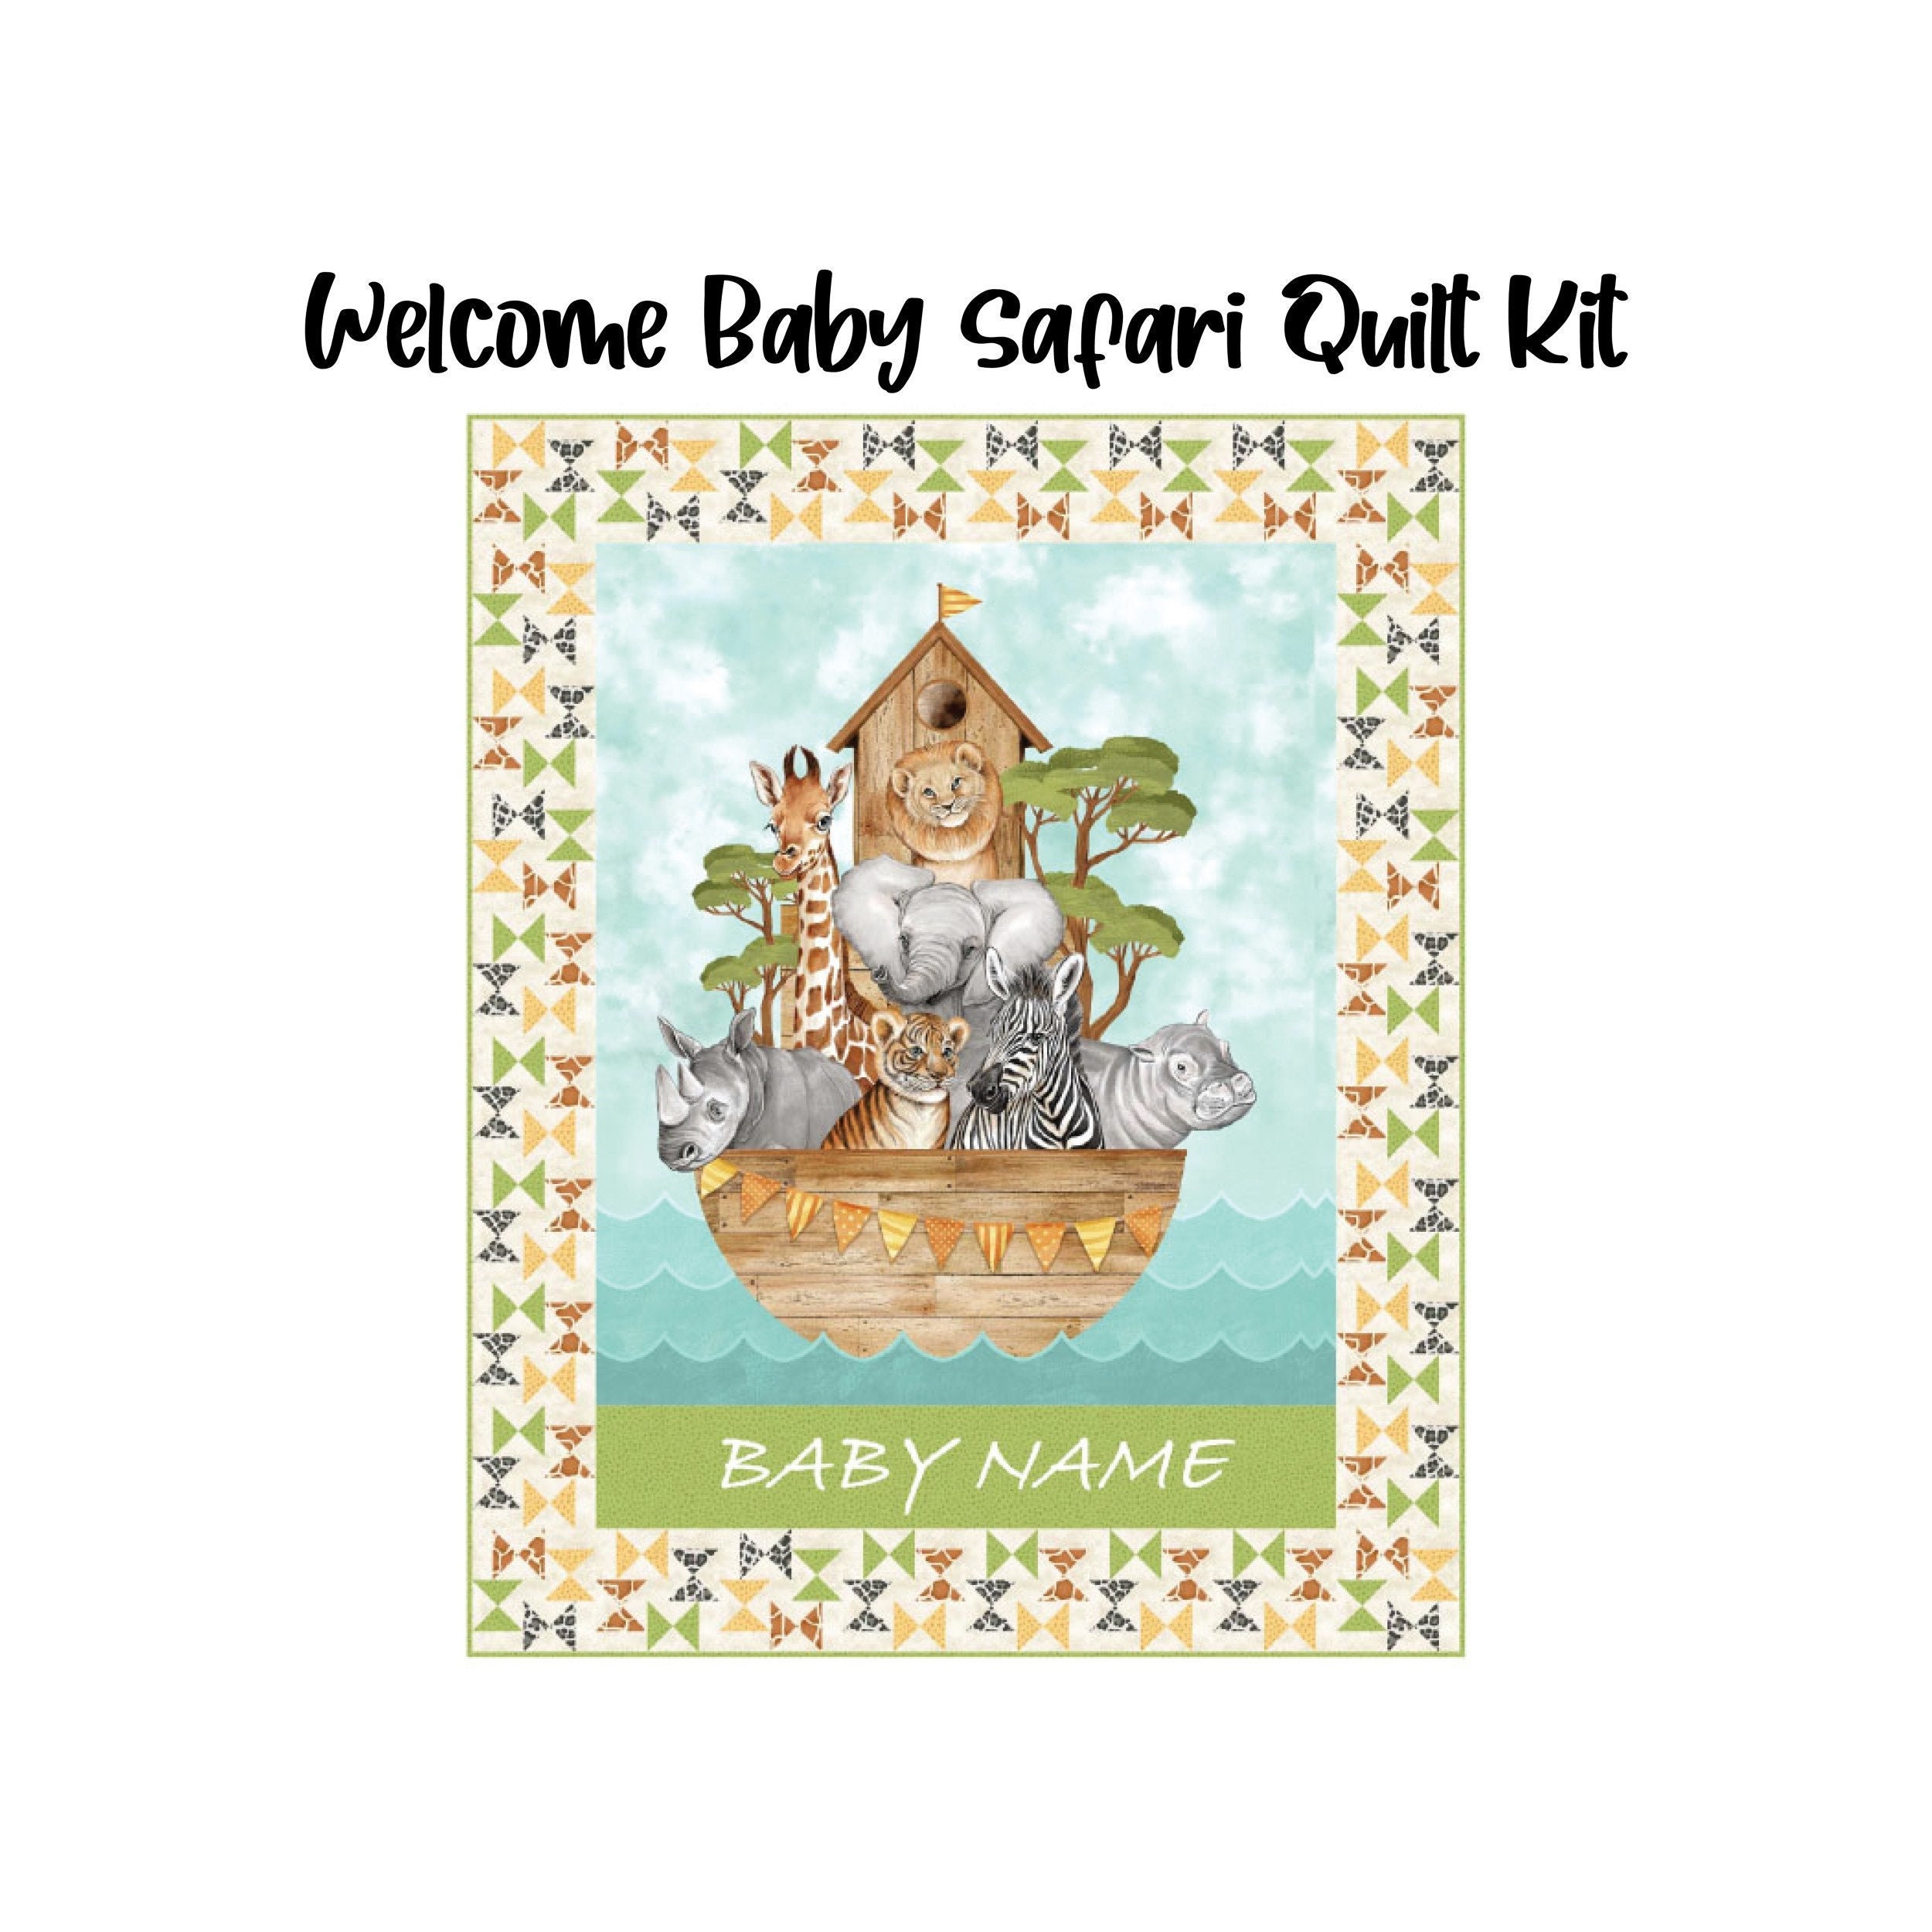 All Aboard quilt kit featuring Baby Safari fabrics from Northcott